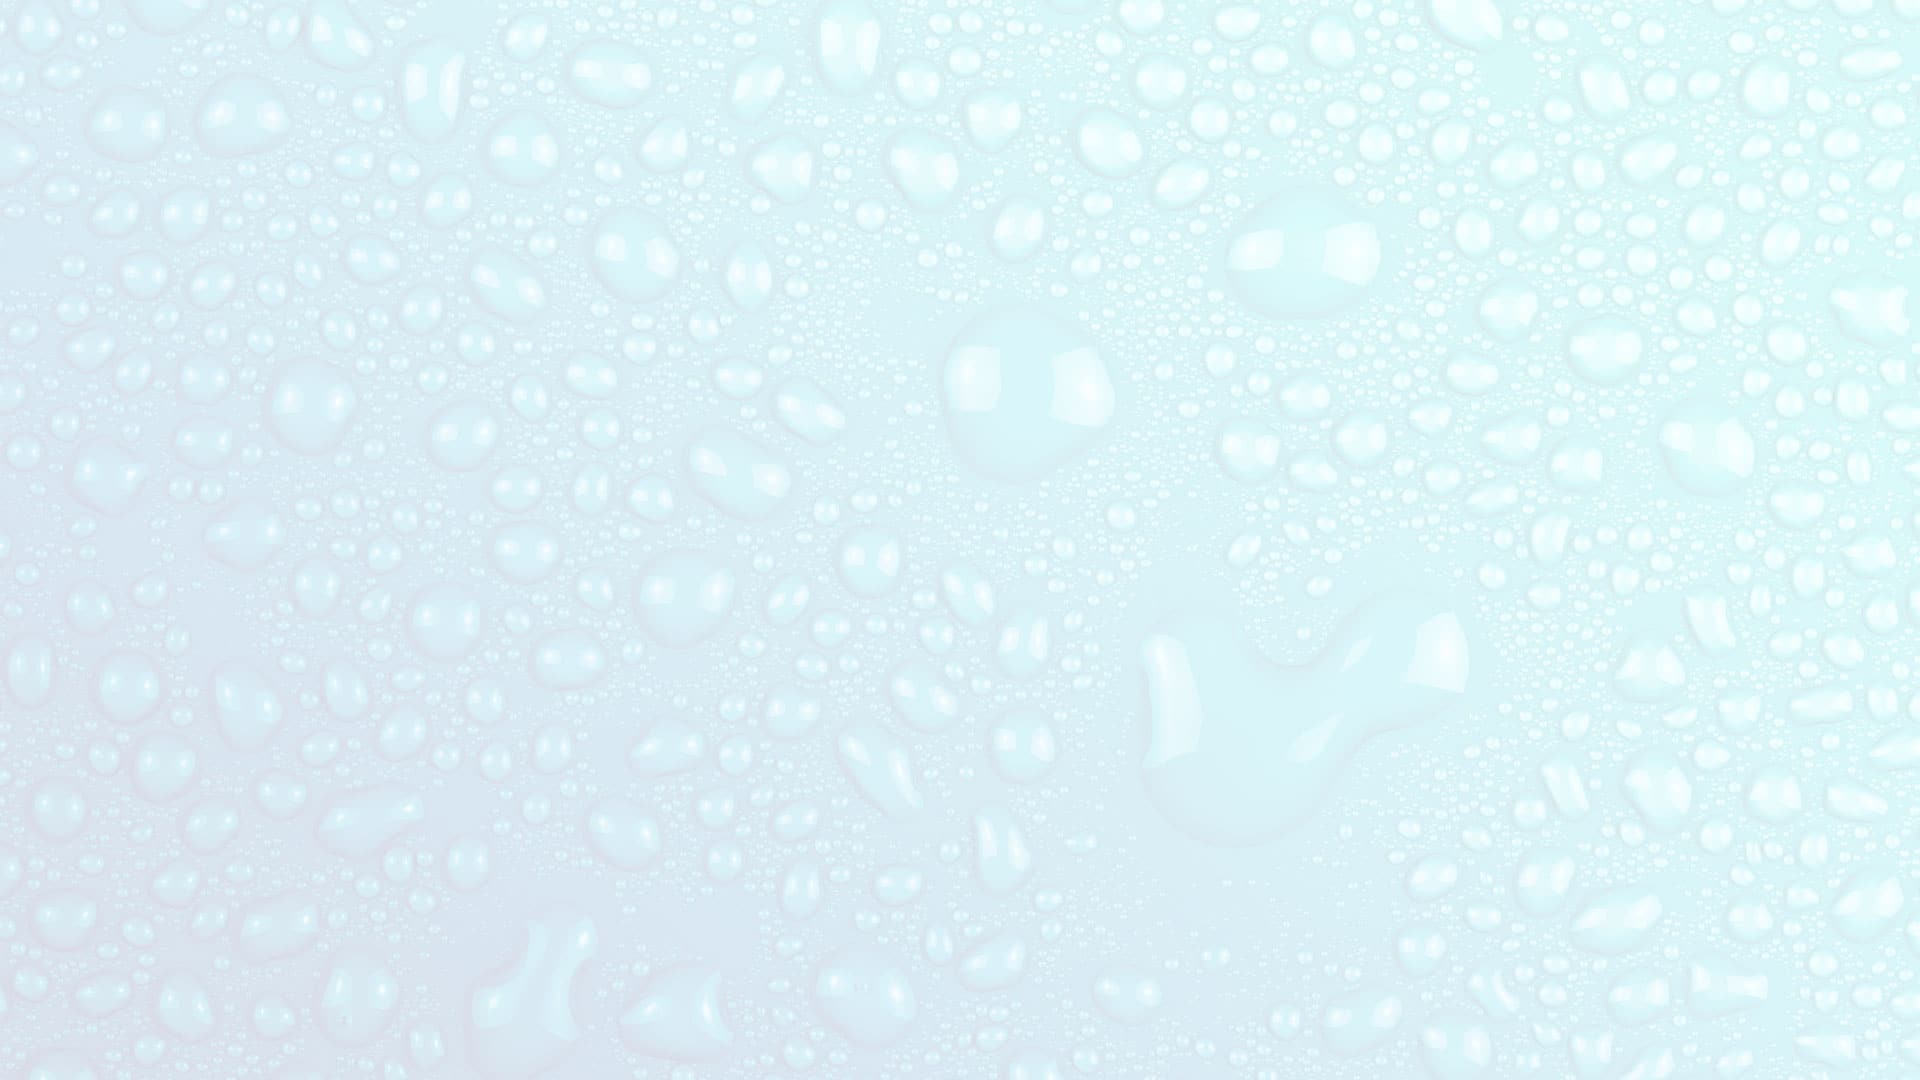 Background Water Image